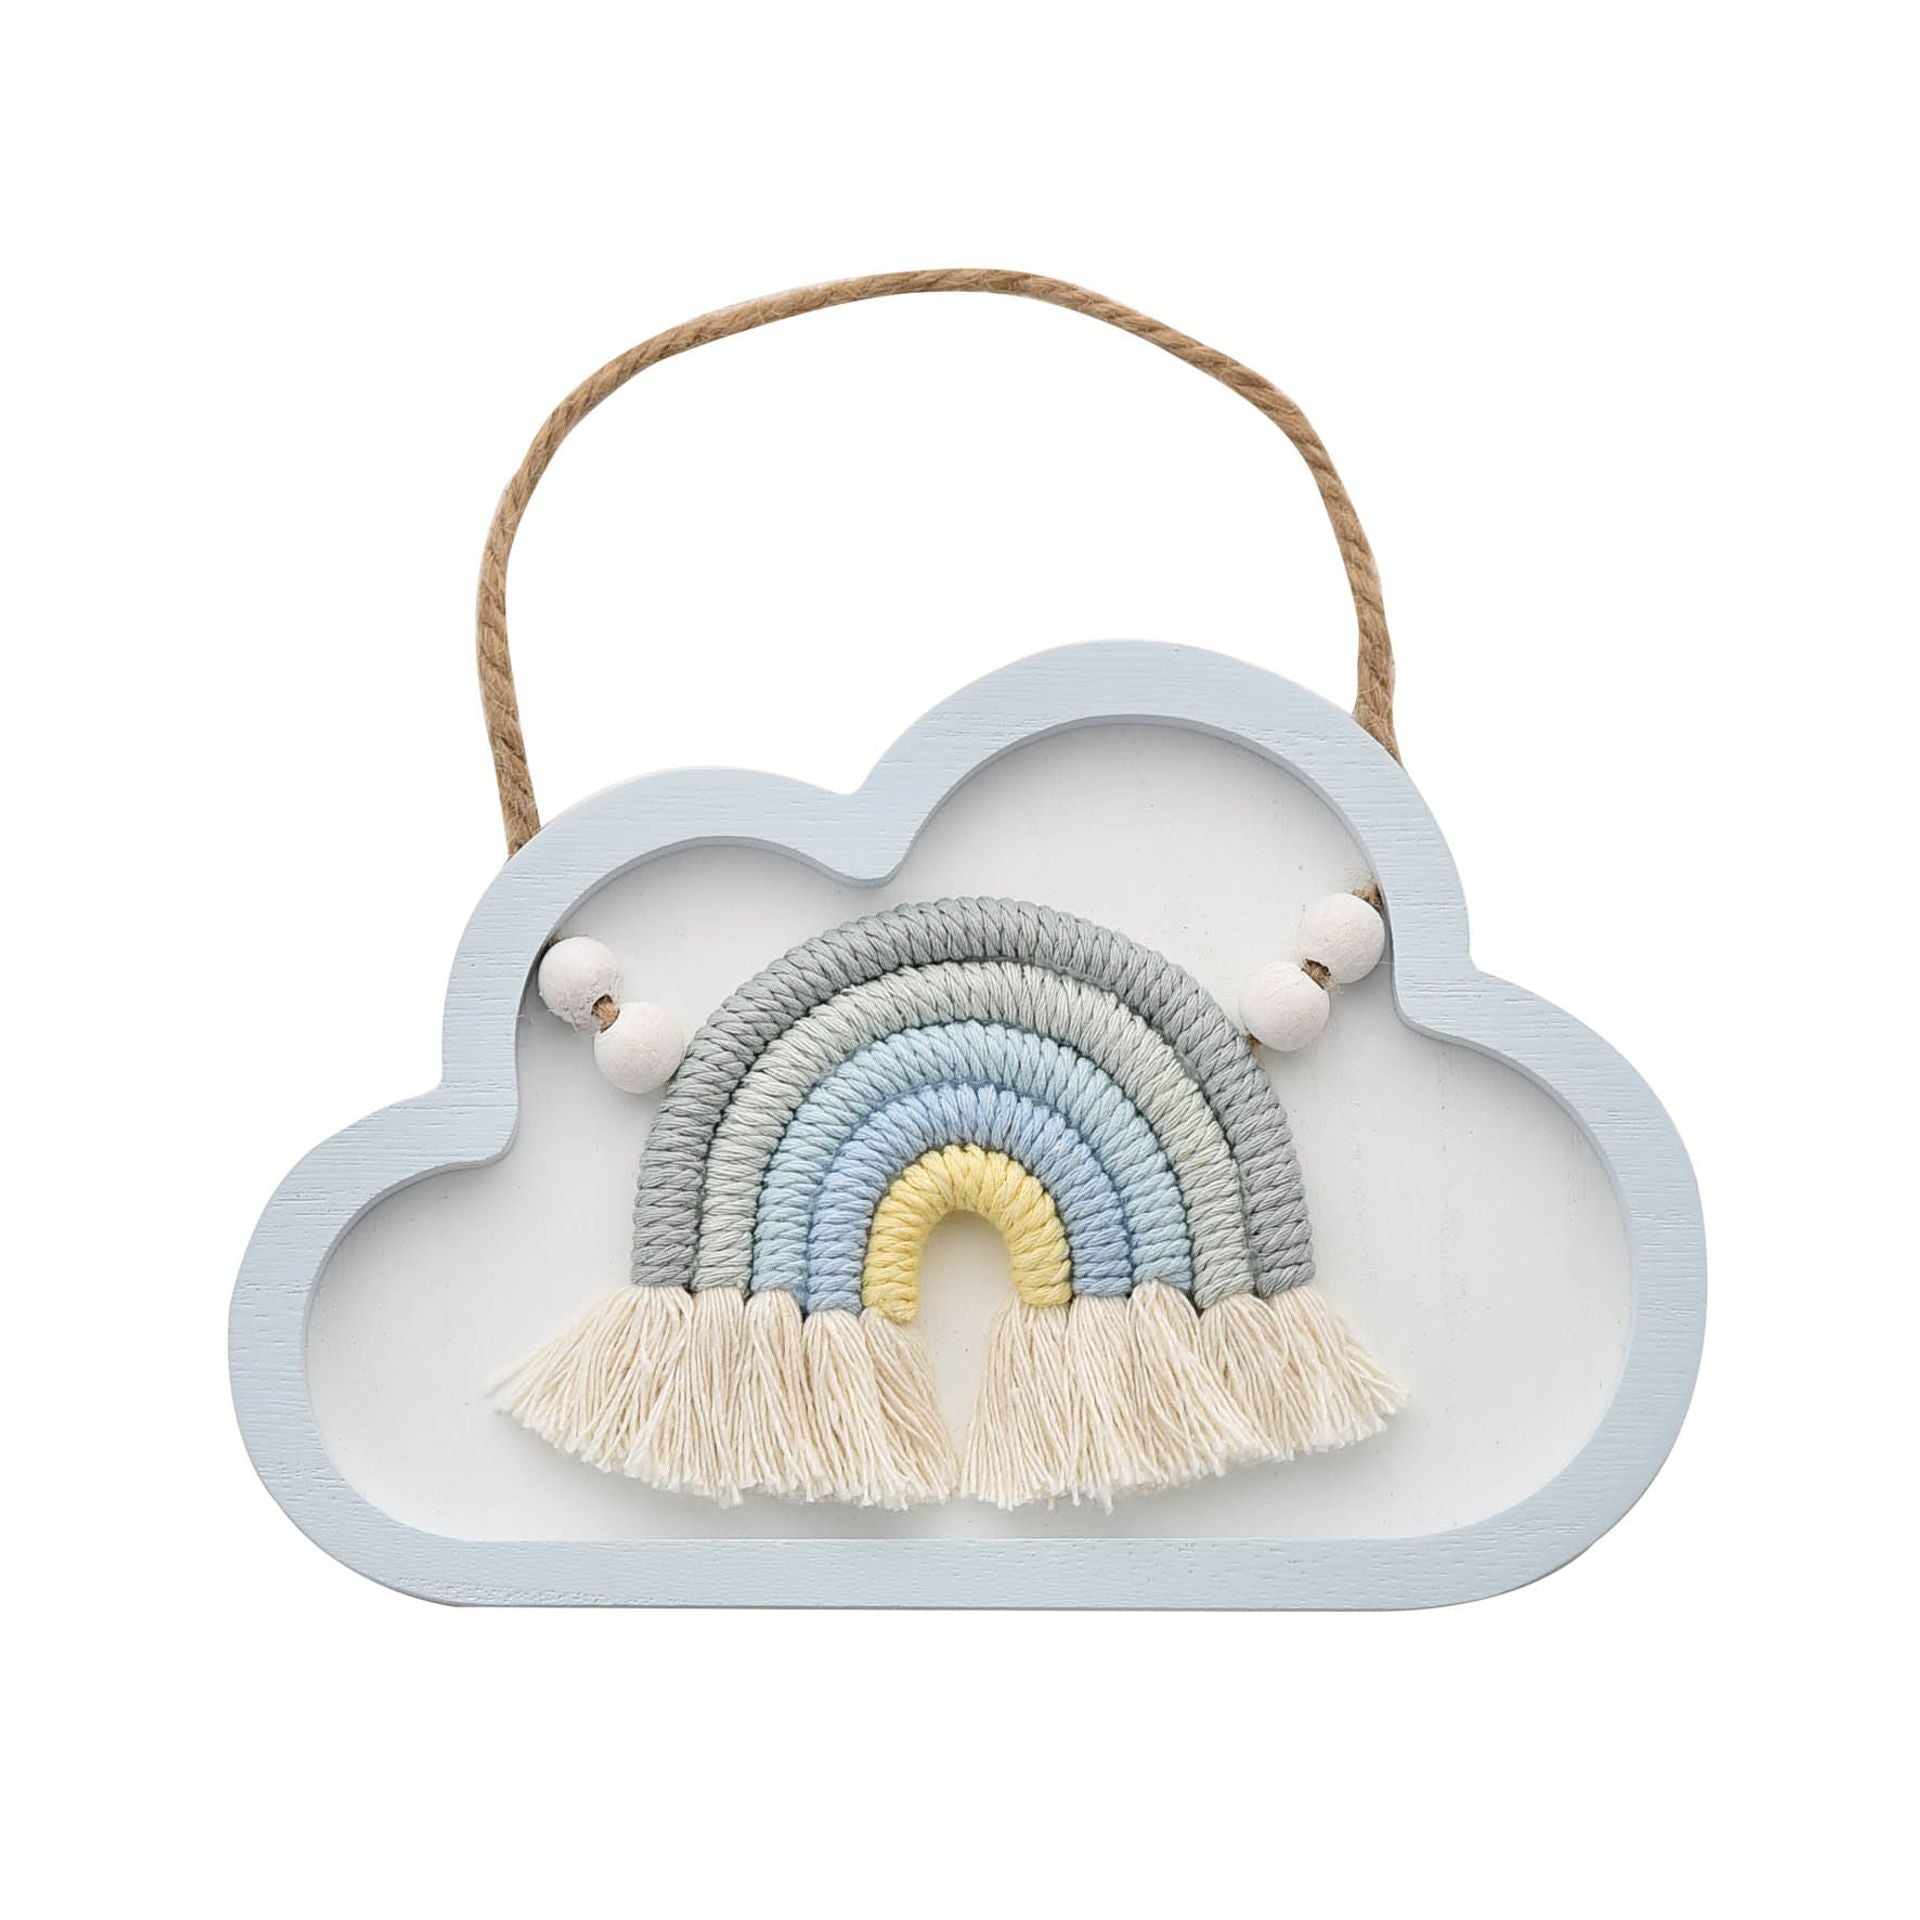 A blue cloud shaped nursery plaque with a white background and a blue pallet macrame rainbow in the middle